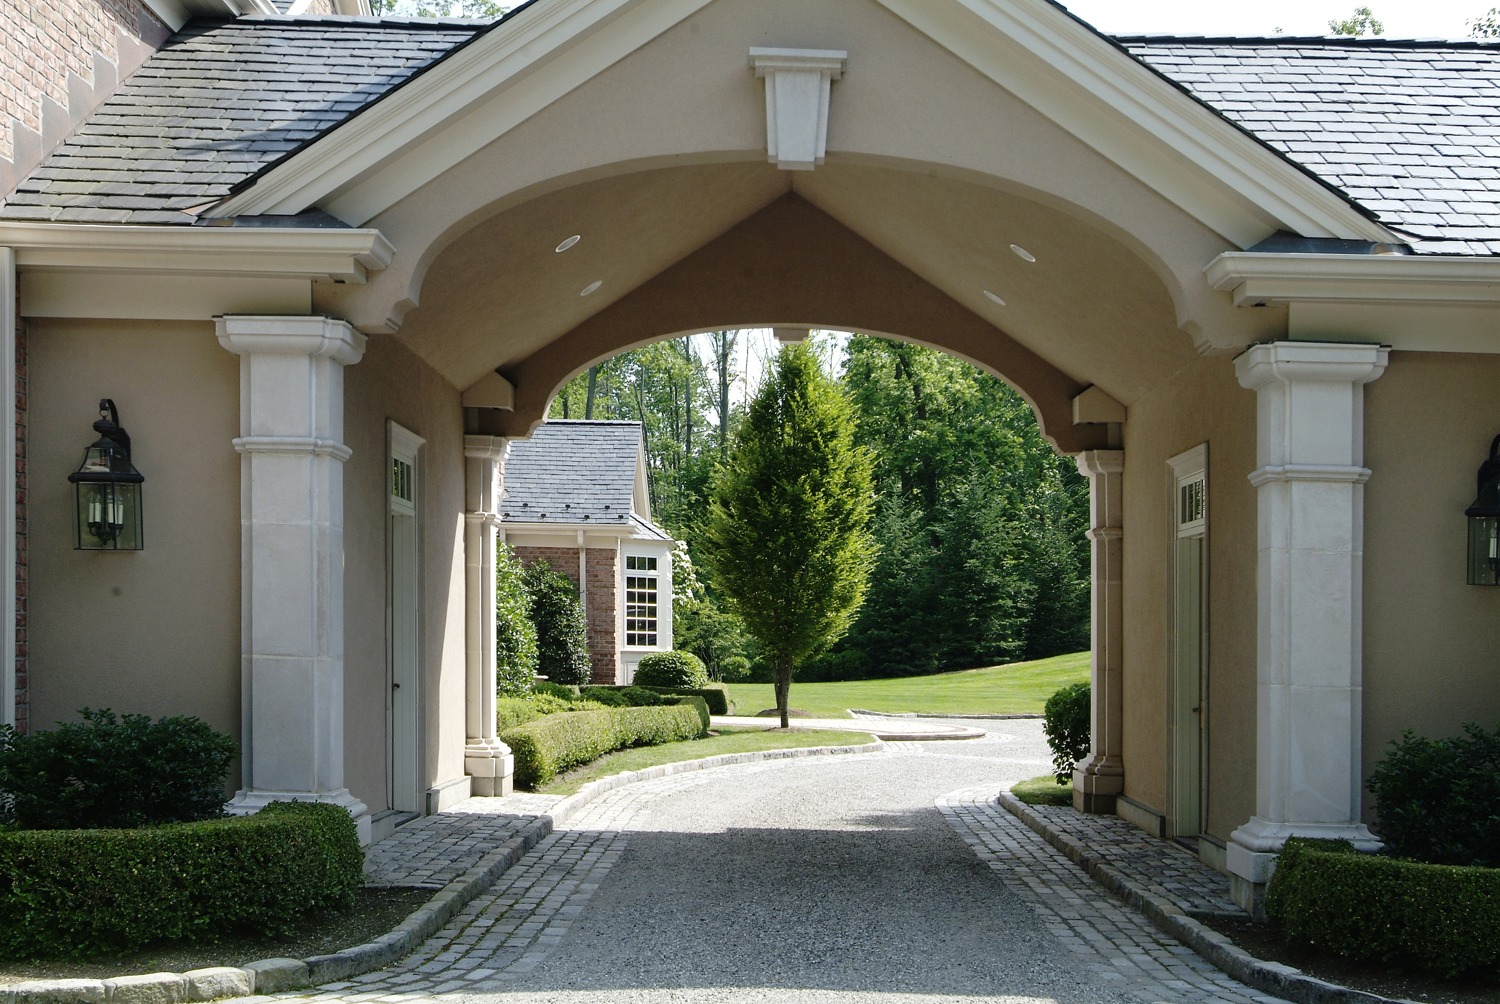 An elegant stone driveway passes through an arched porte-cochère, leading towards a manicured garden and a traditional brick building with greenery.